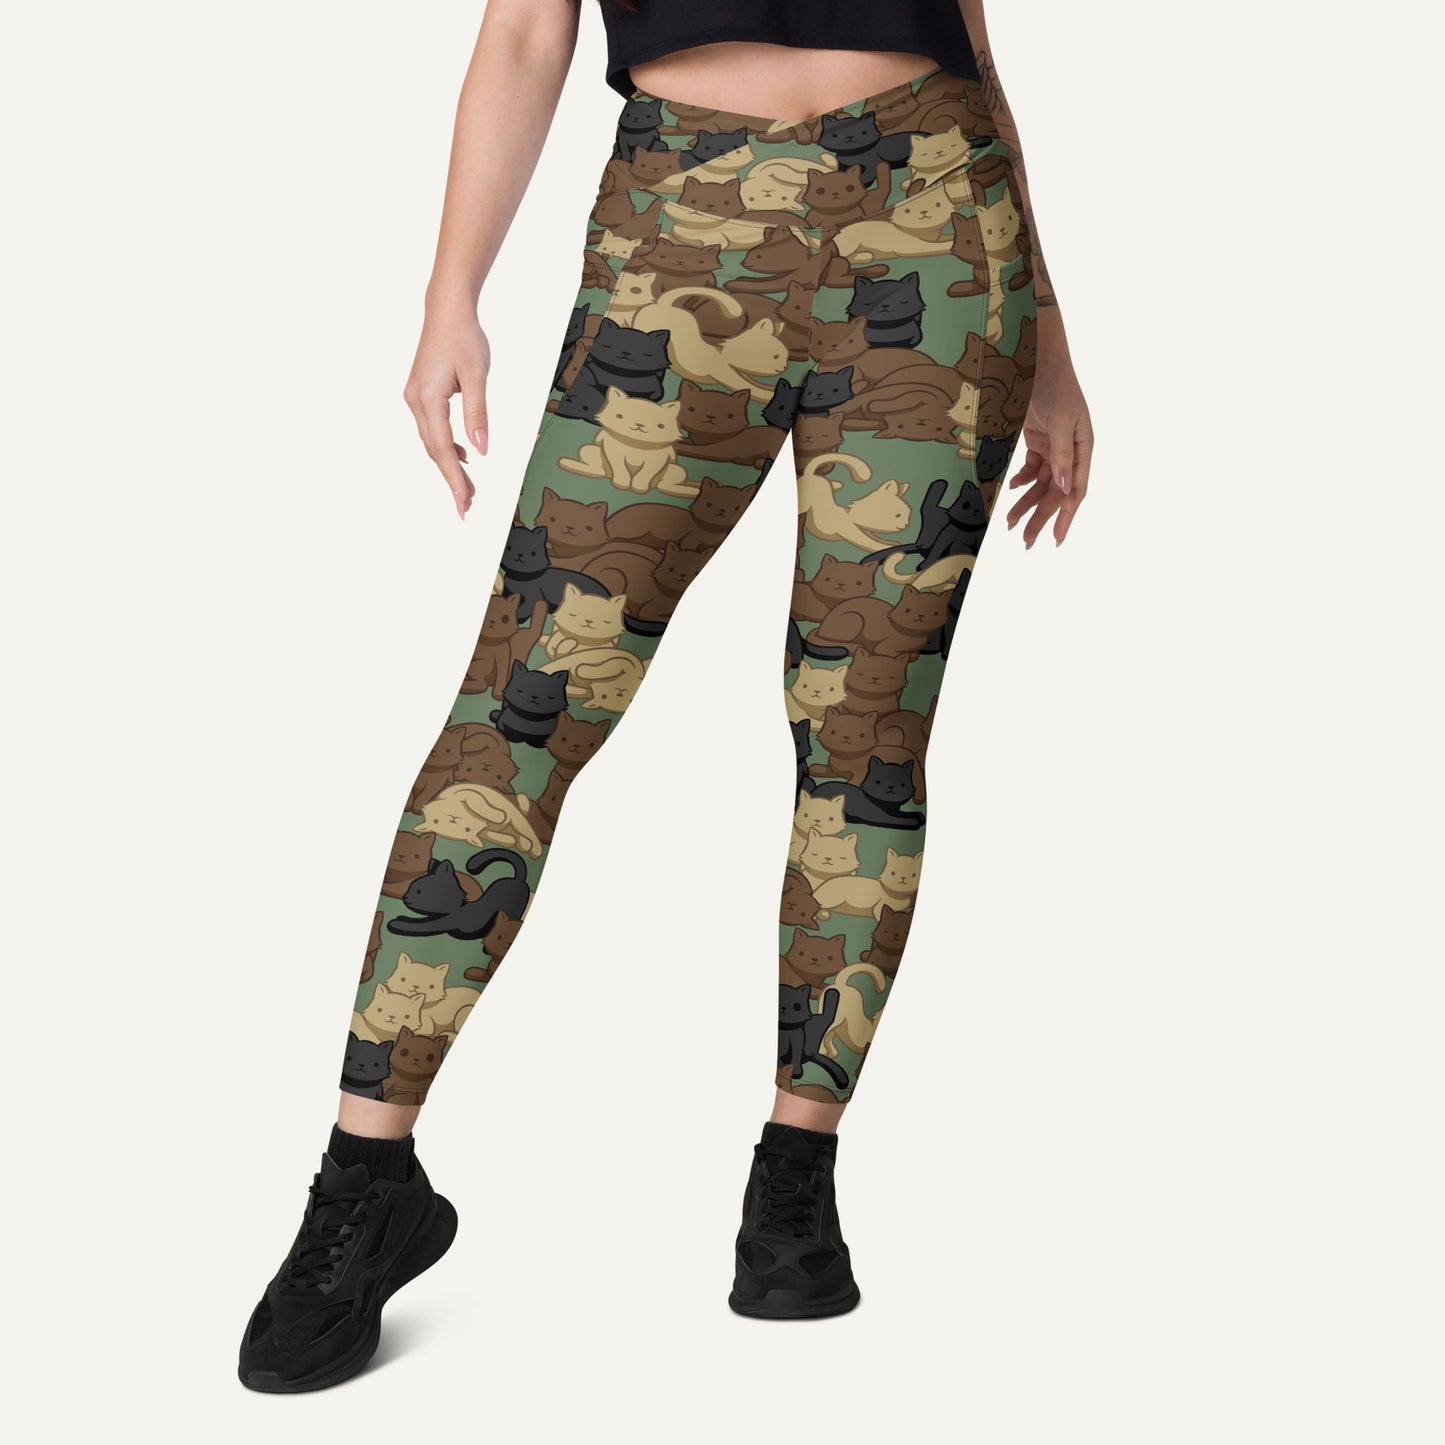 Cats Camouflage Woodland High-Waisted Crossover Leggings With Pockets